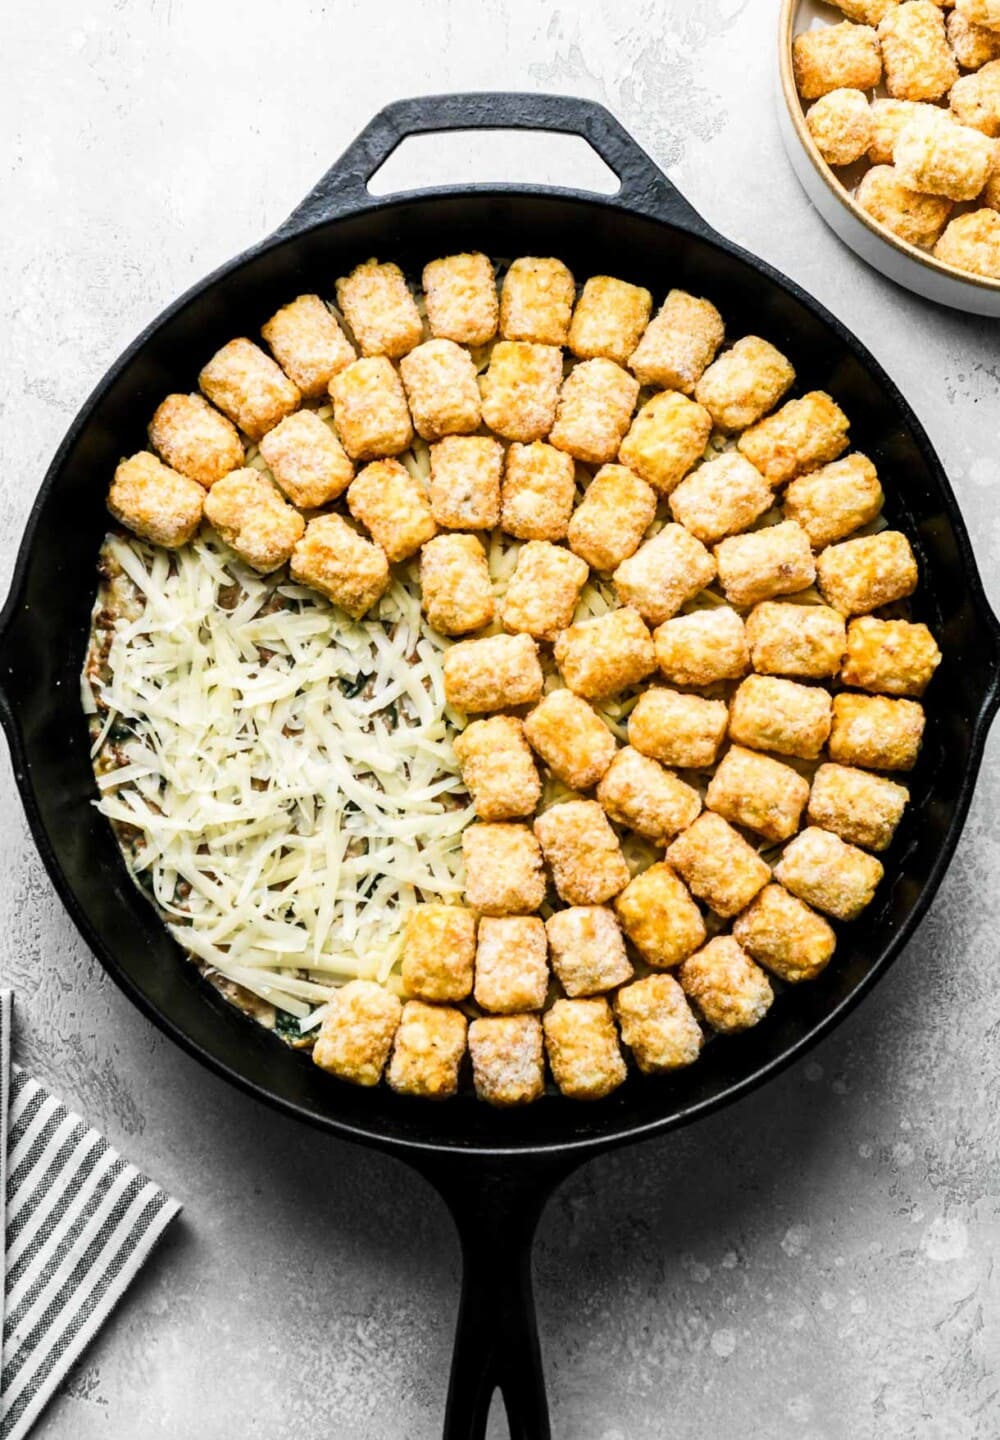 tater tot hotdish, prepared in a cast iron skillet, uncooked.